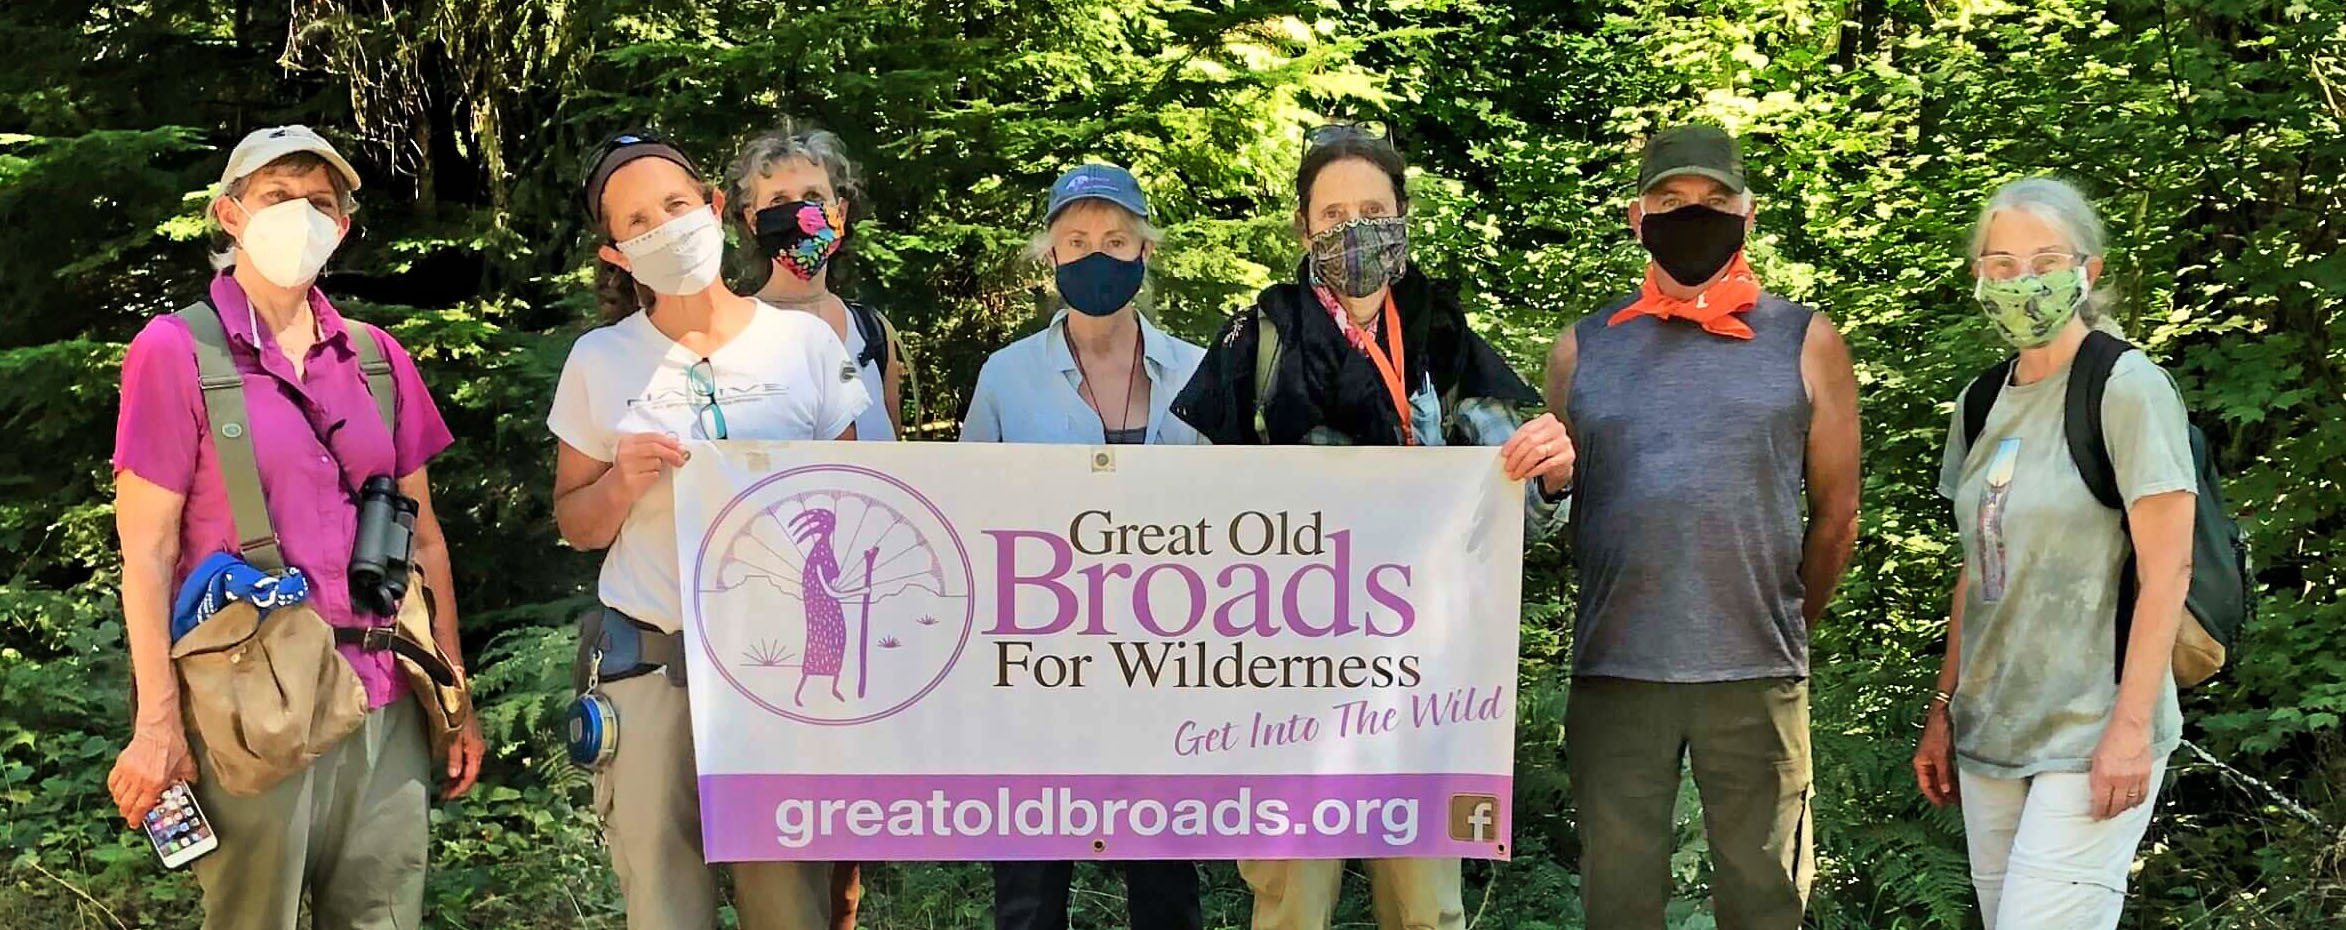 The Great Old Broads for Wilderness Podcast